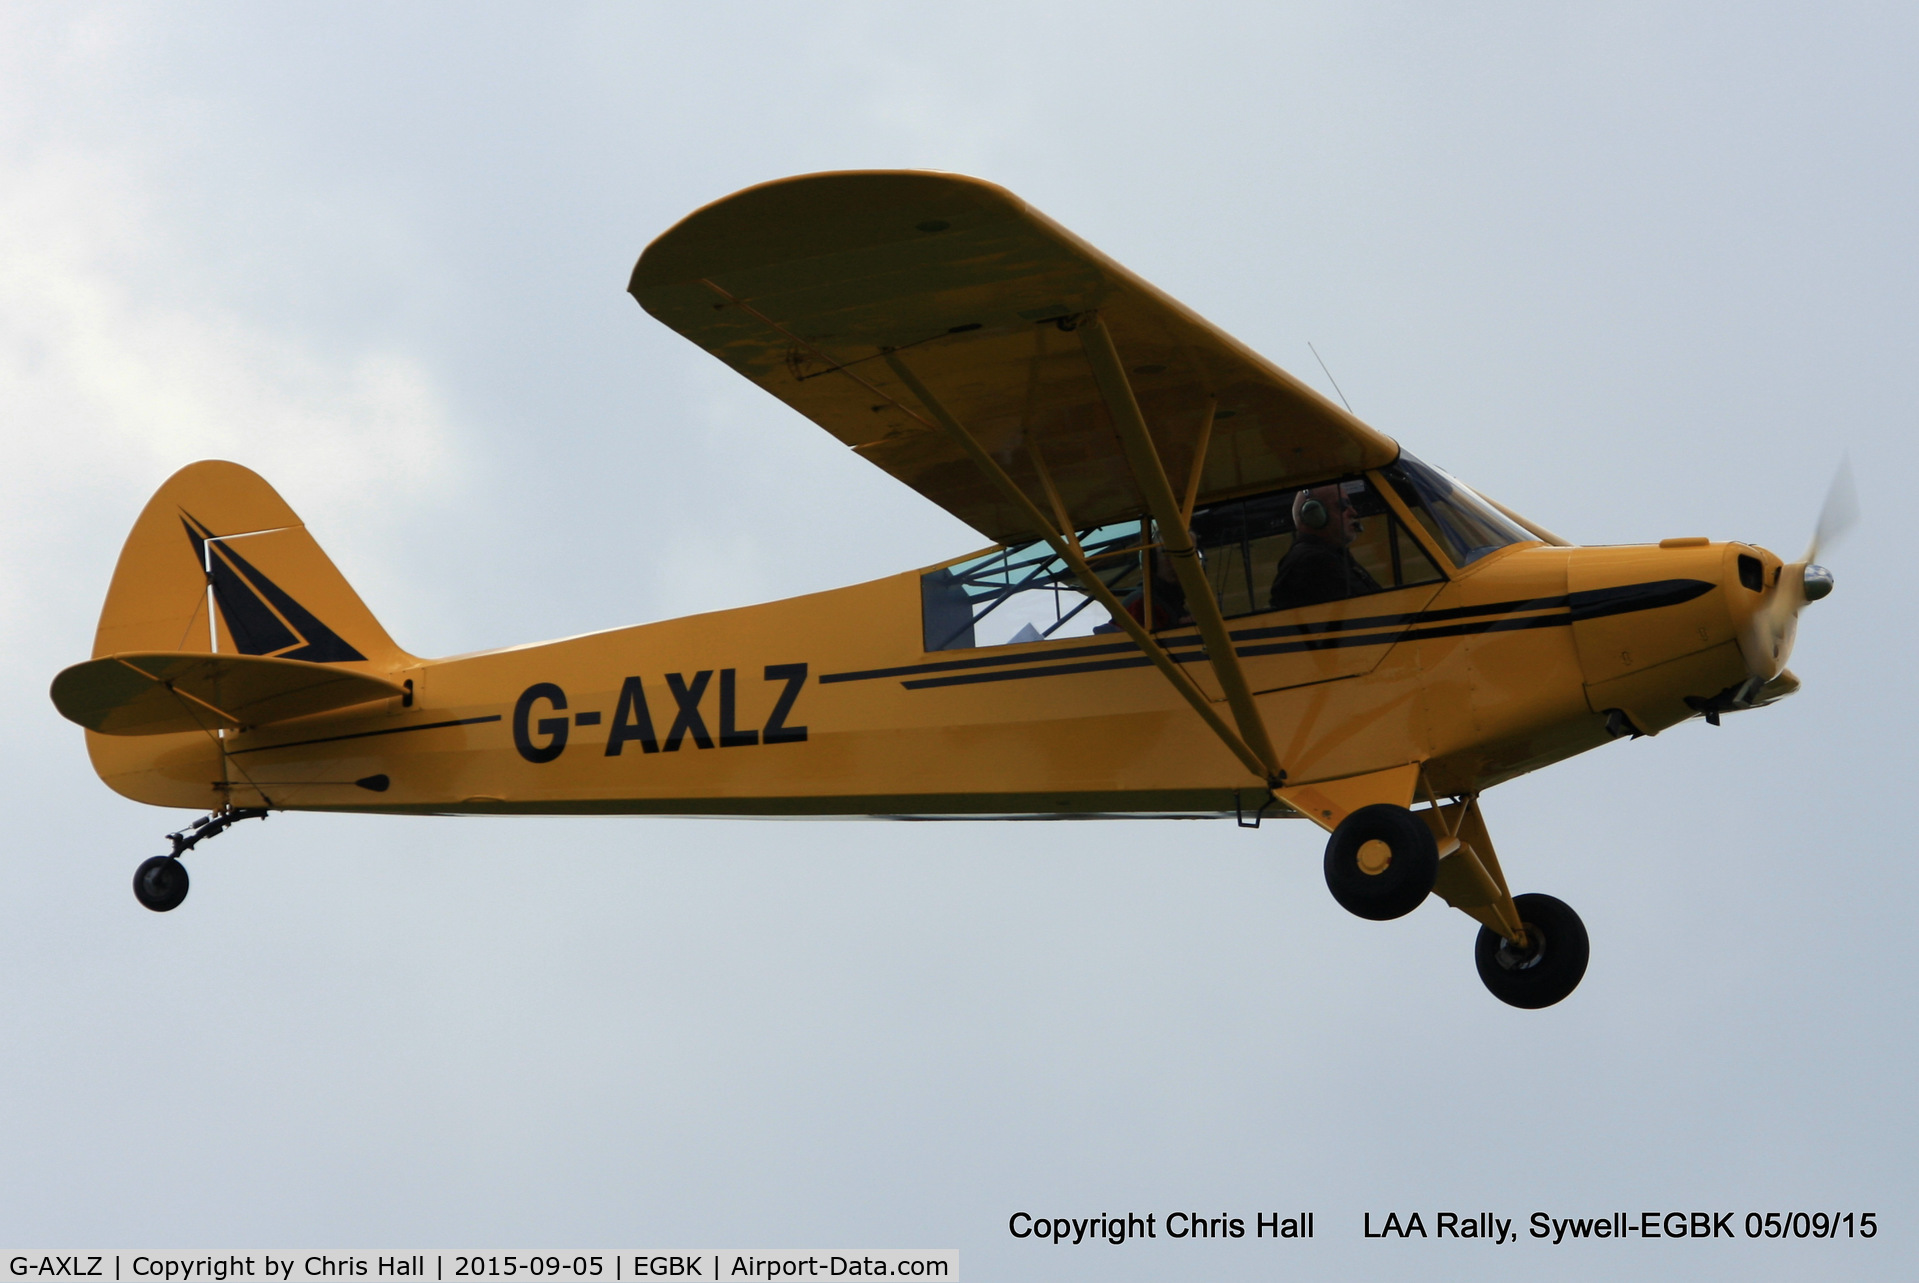 G-AXLZ, 1952 Piper L-18C Super Cub C/N 18-2052, at the LAA Rally 2015, Sywell